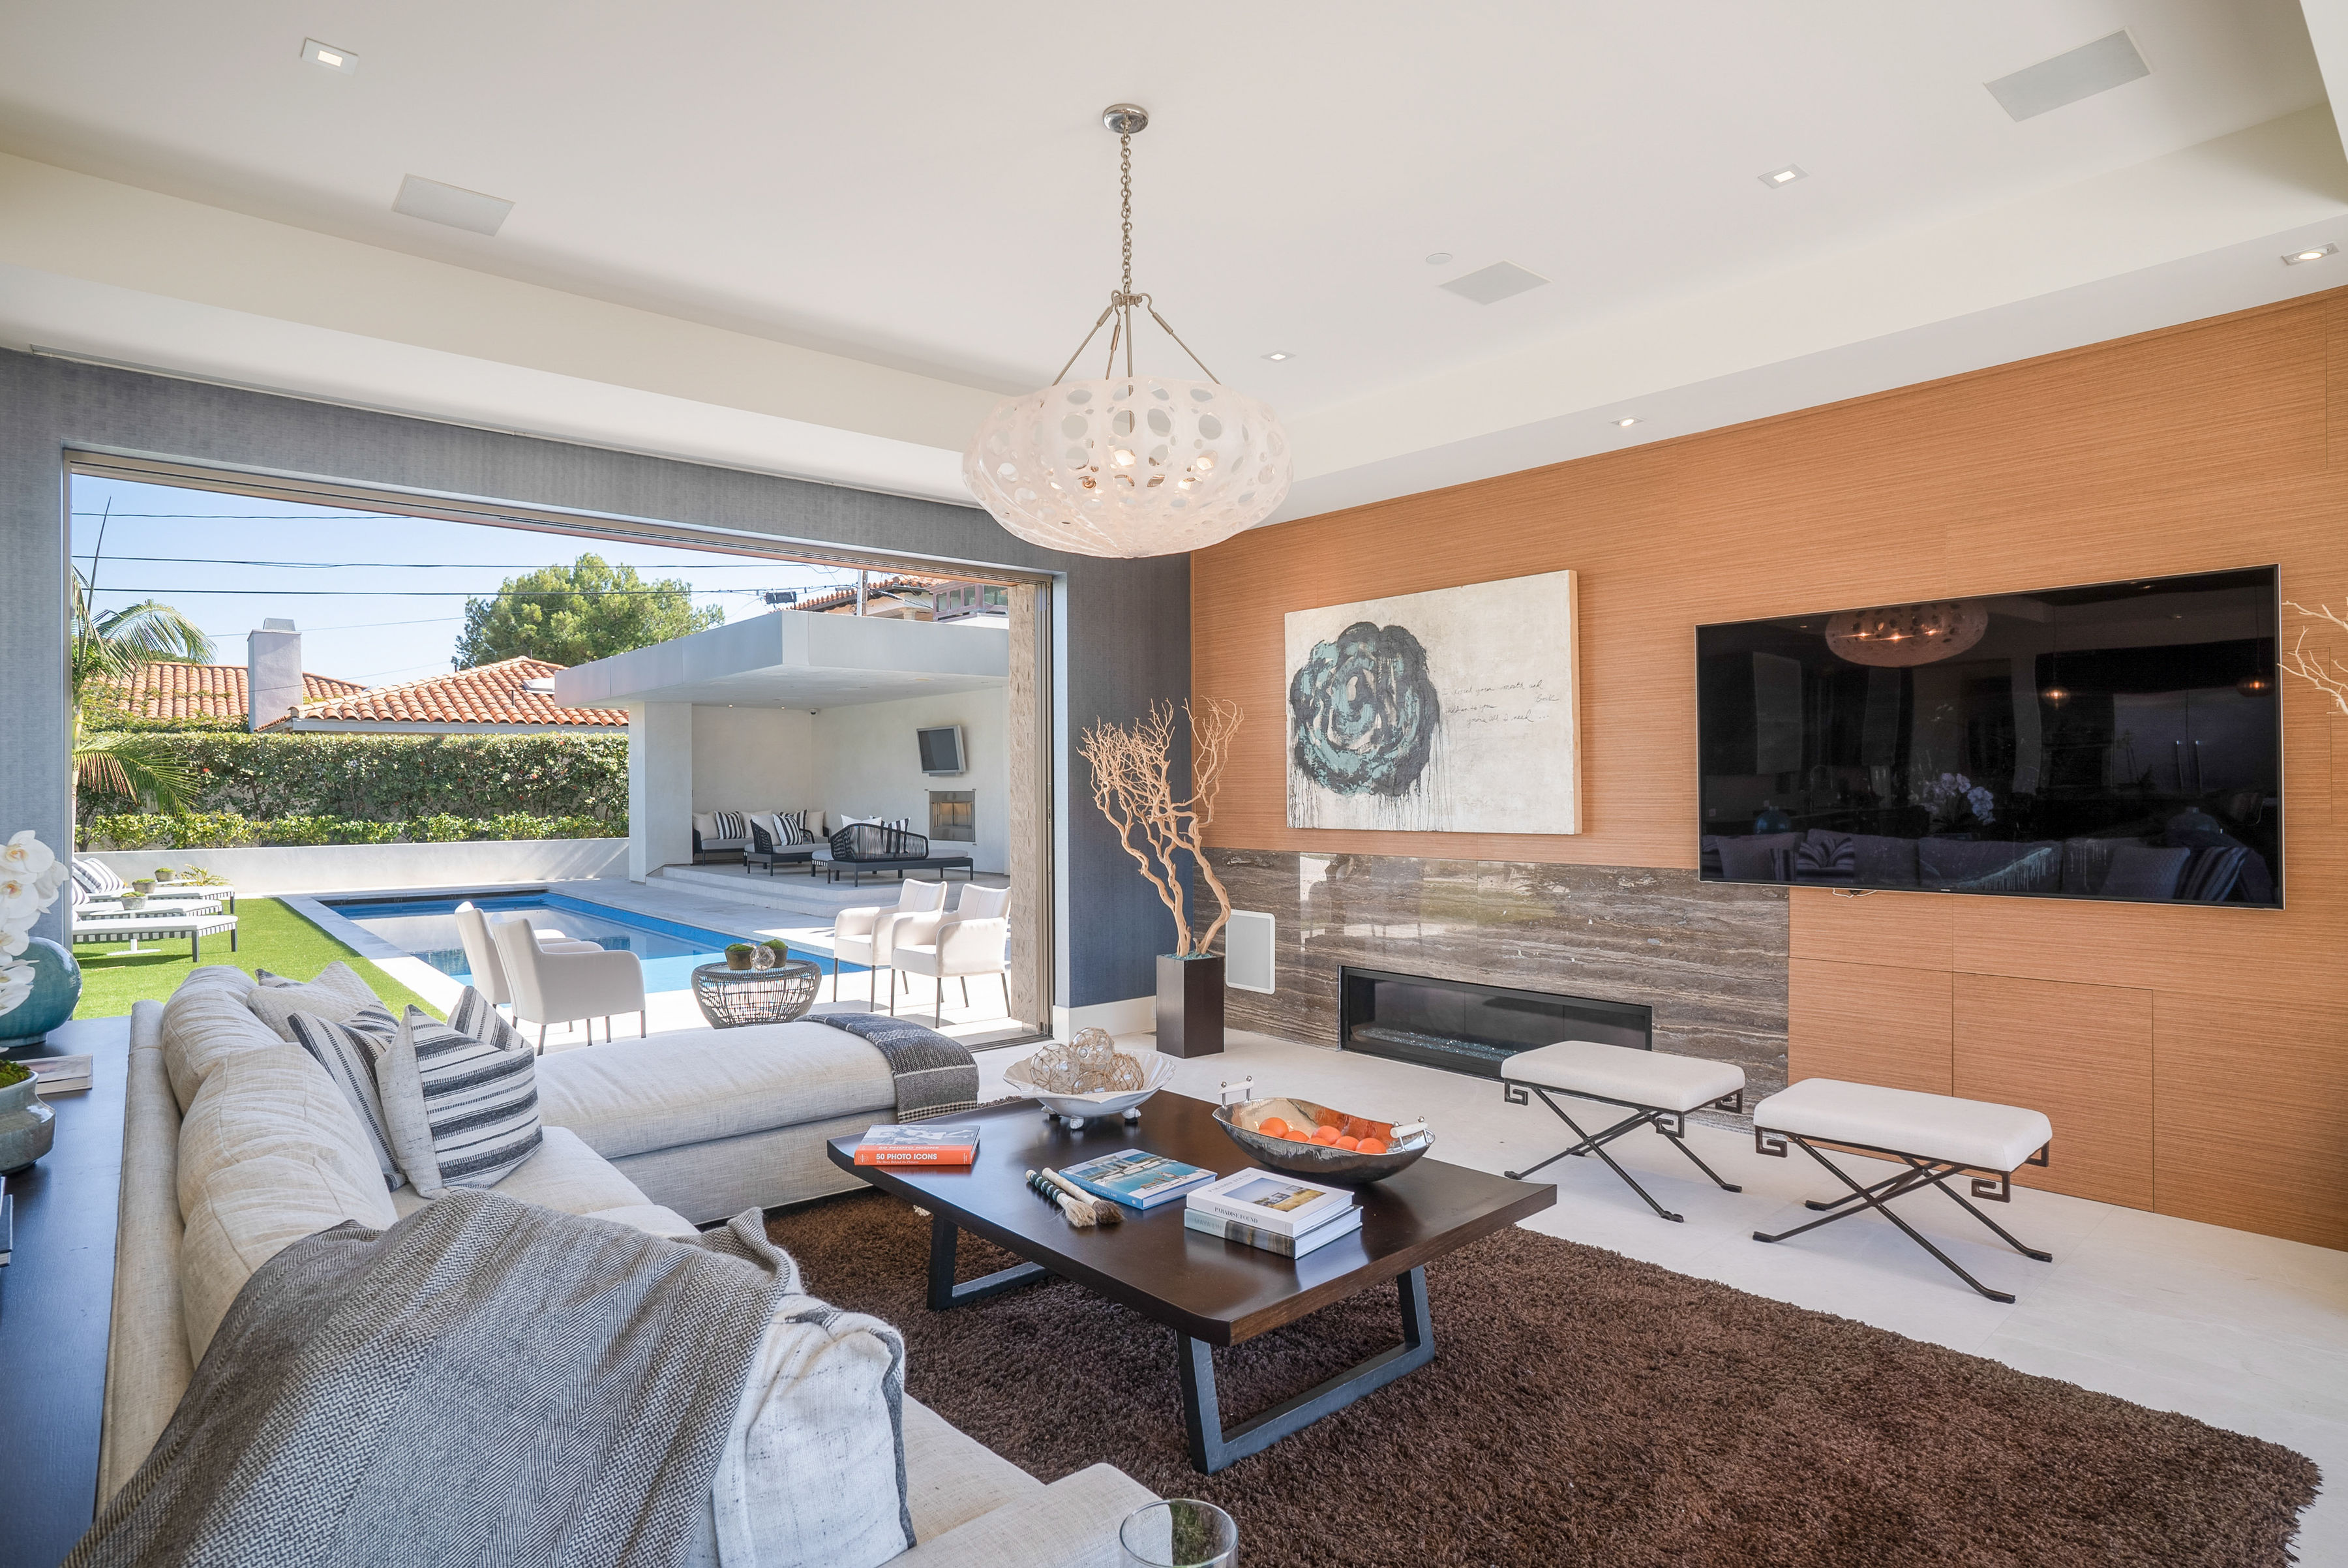 Manhattan Beach Living Room features full wall sliding window system for indoor outdoor feel, organic shape lighting fixtures, and luxury architectural details